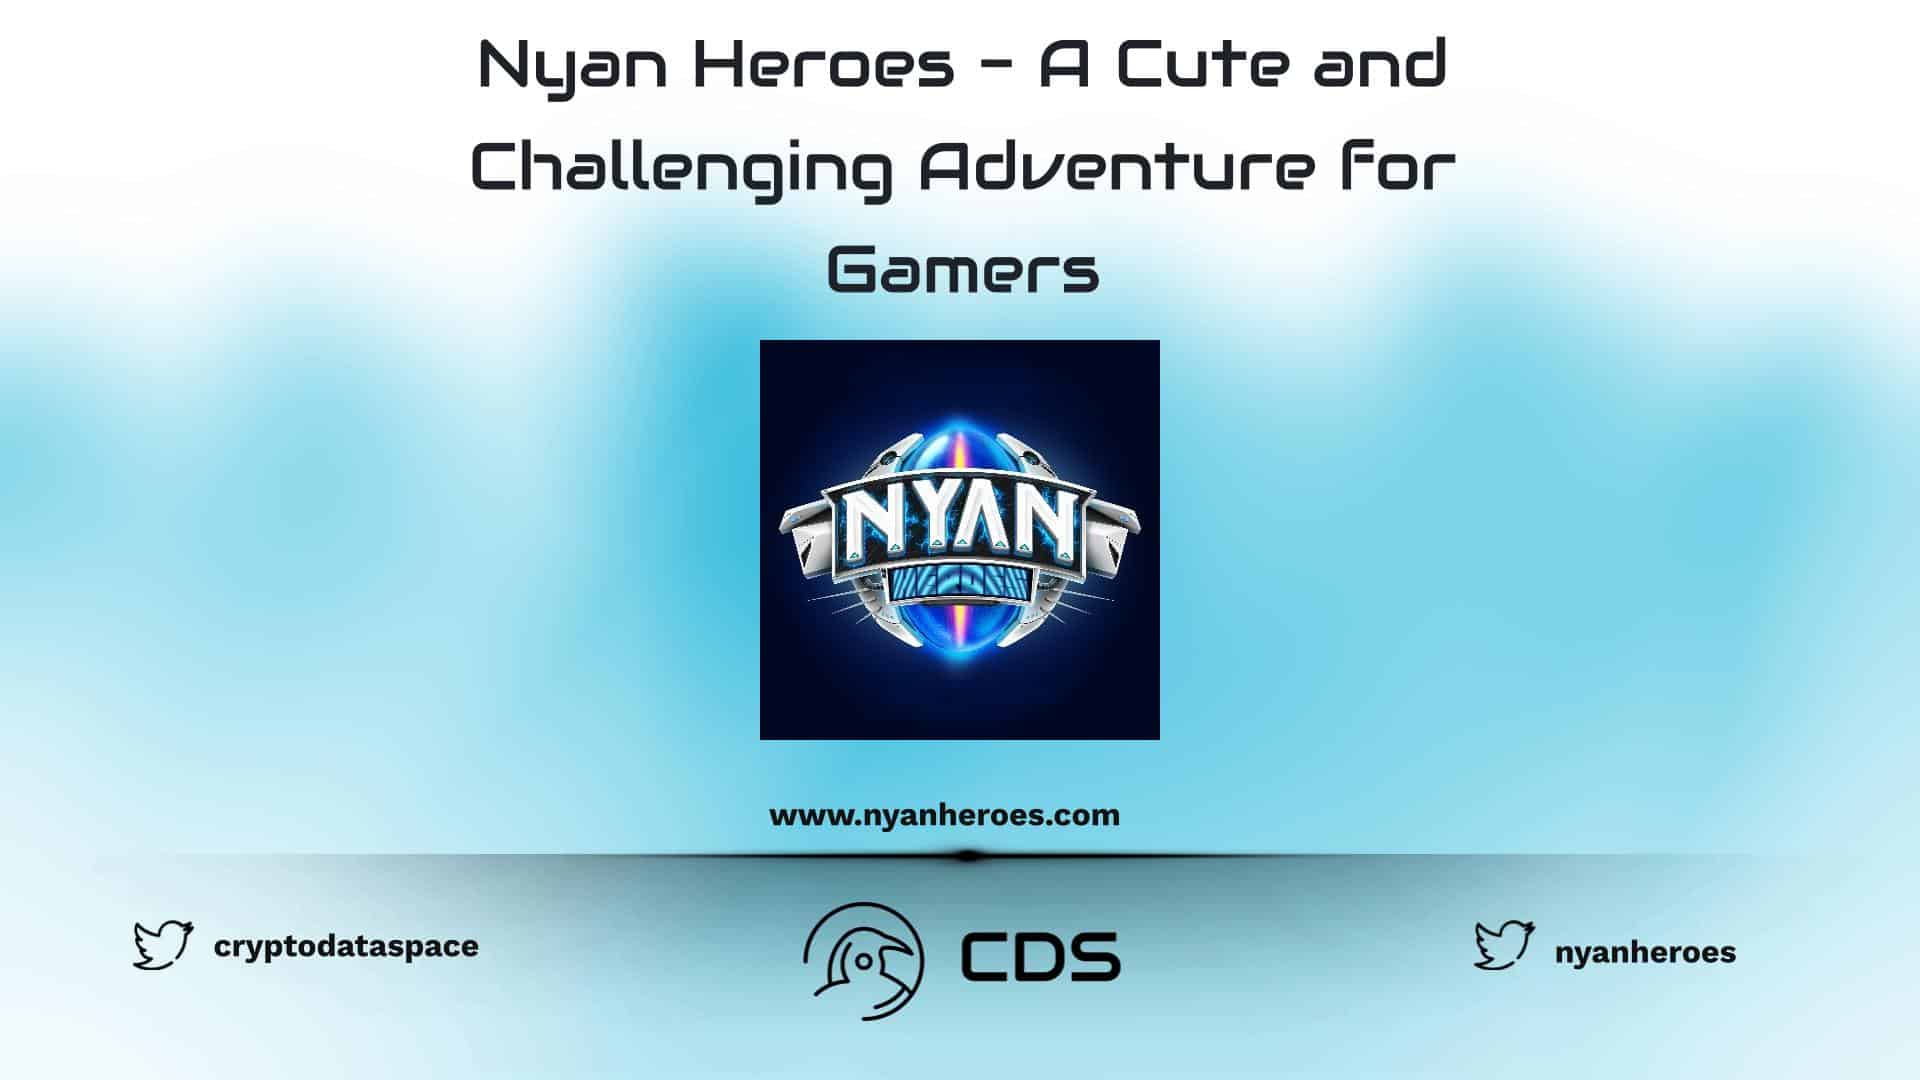 Nyan Heroes - A Cute and Challenging Adventure for Gamers